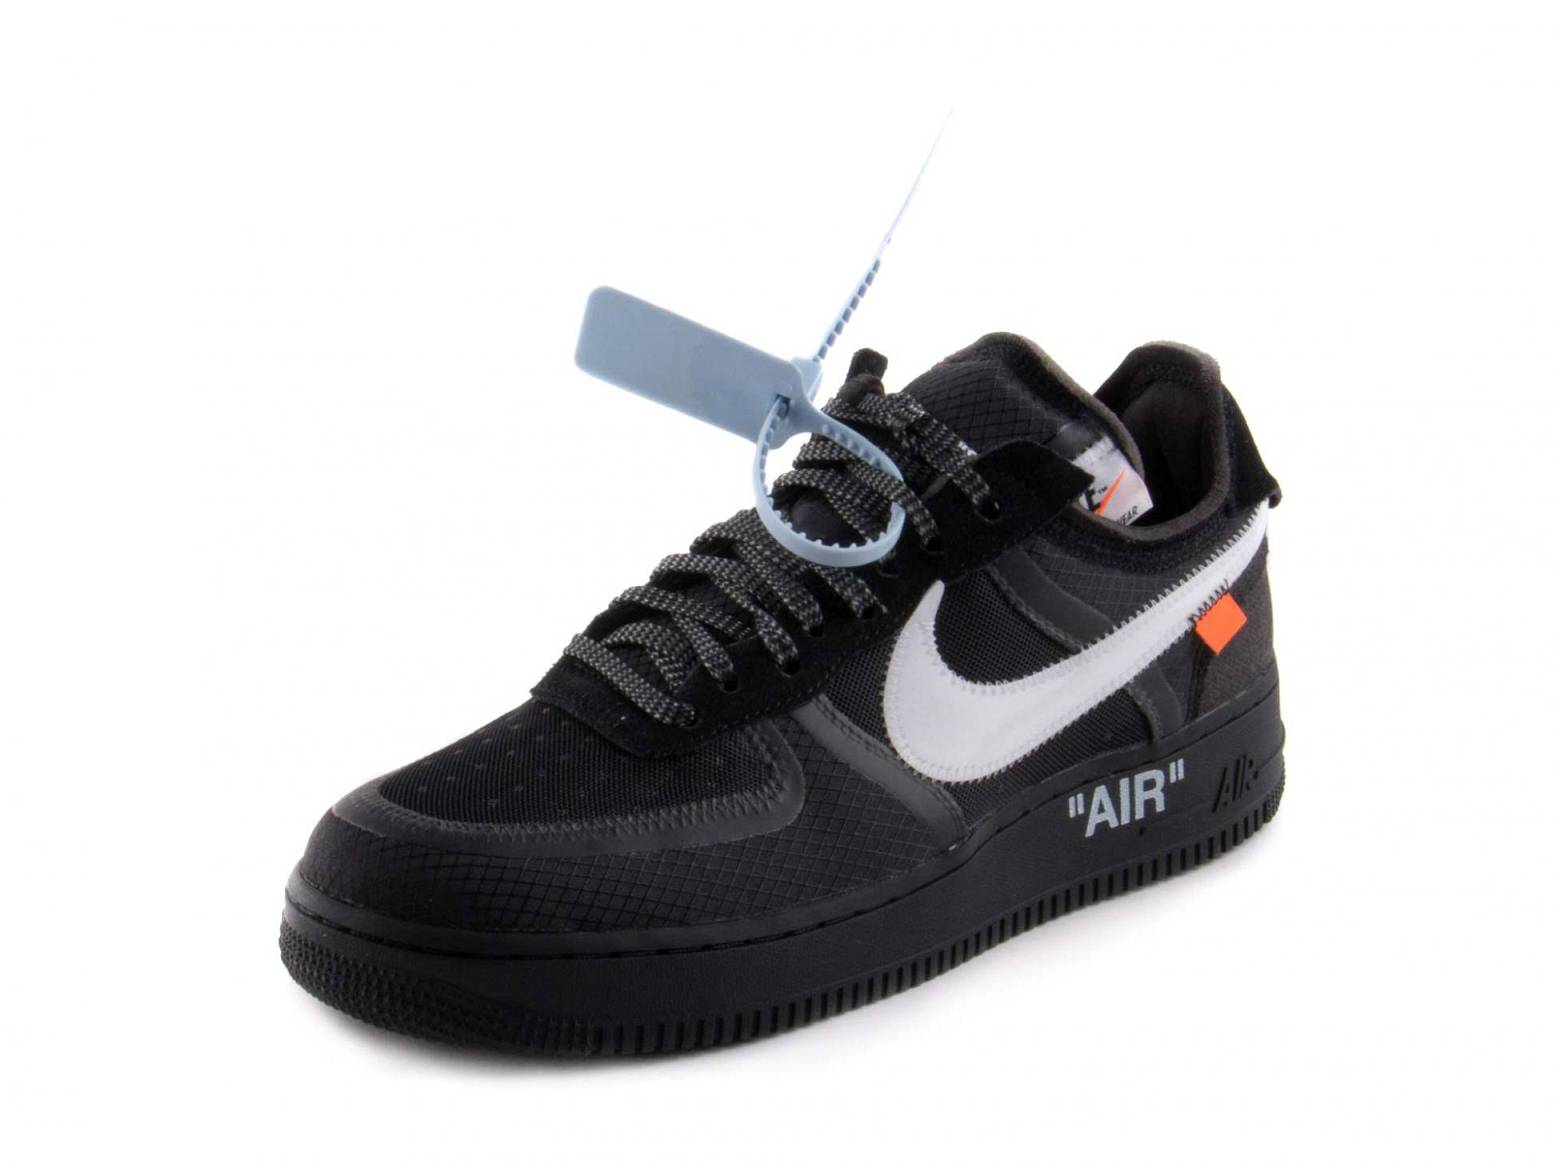 Off-White x Nike Air Force 1 Low color